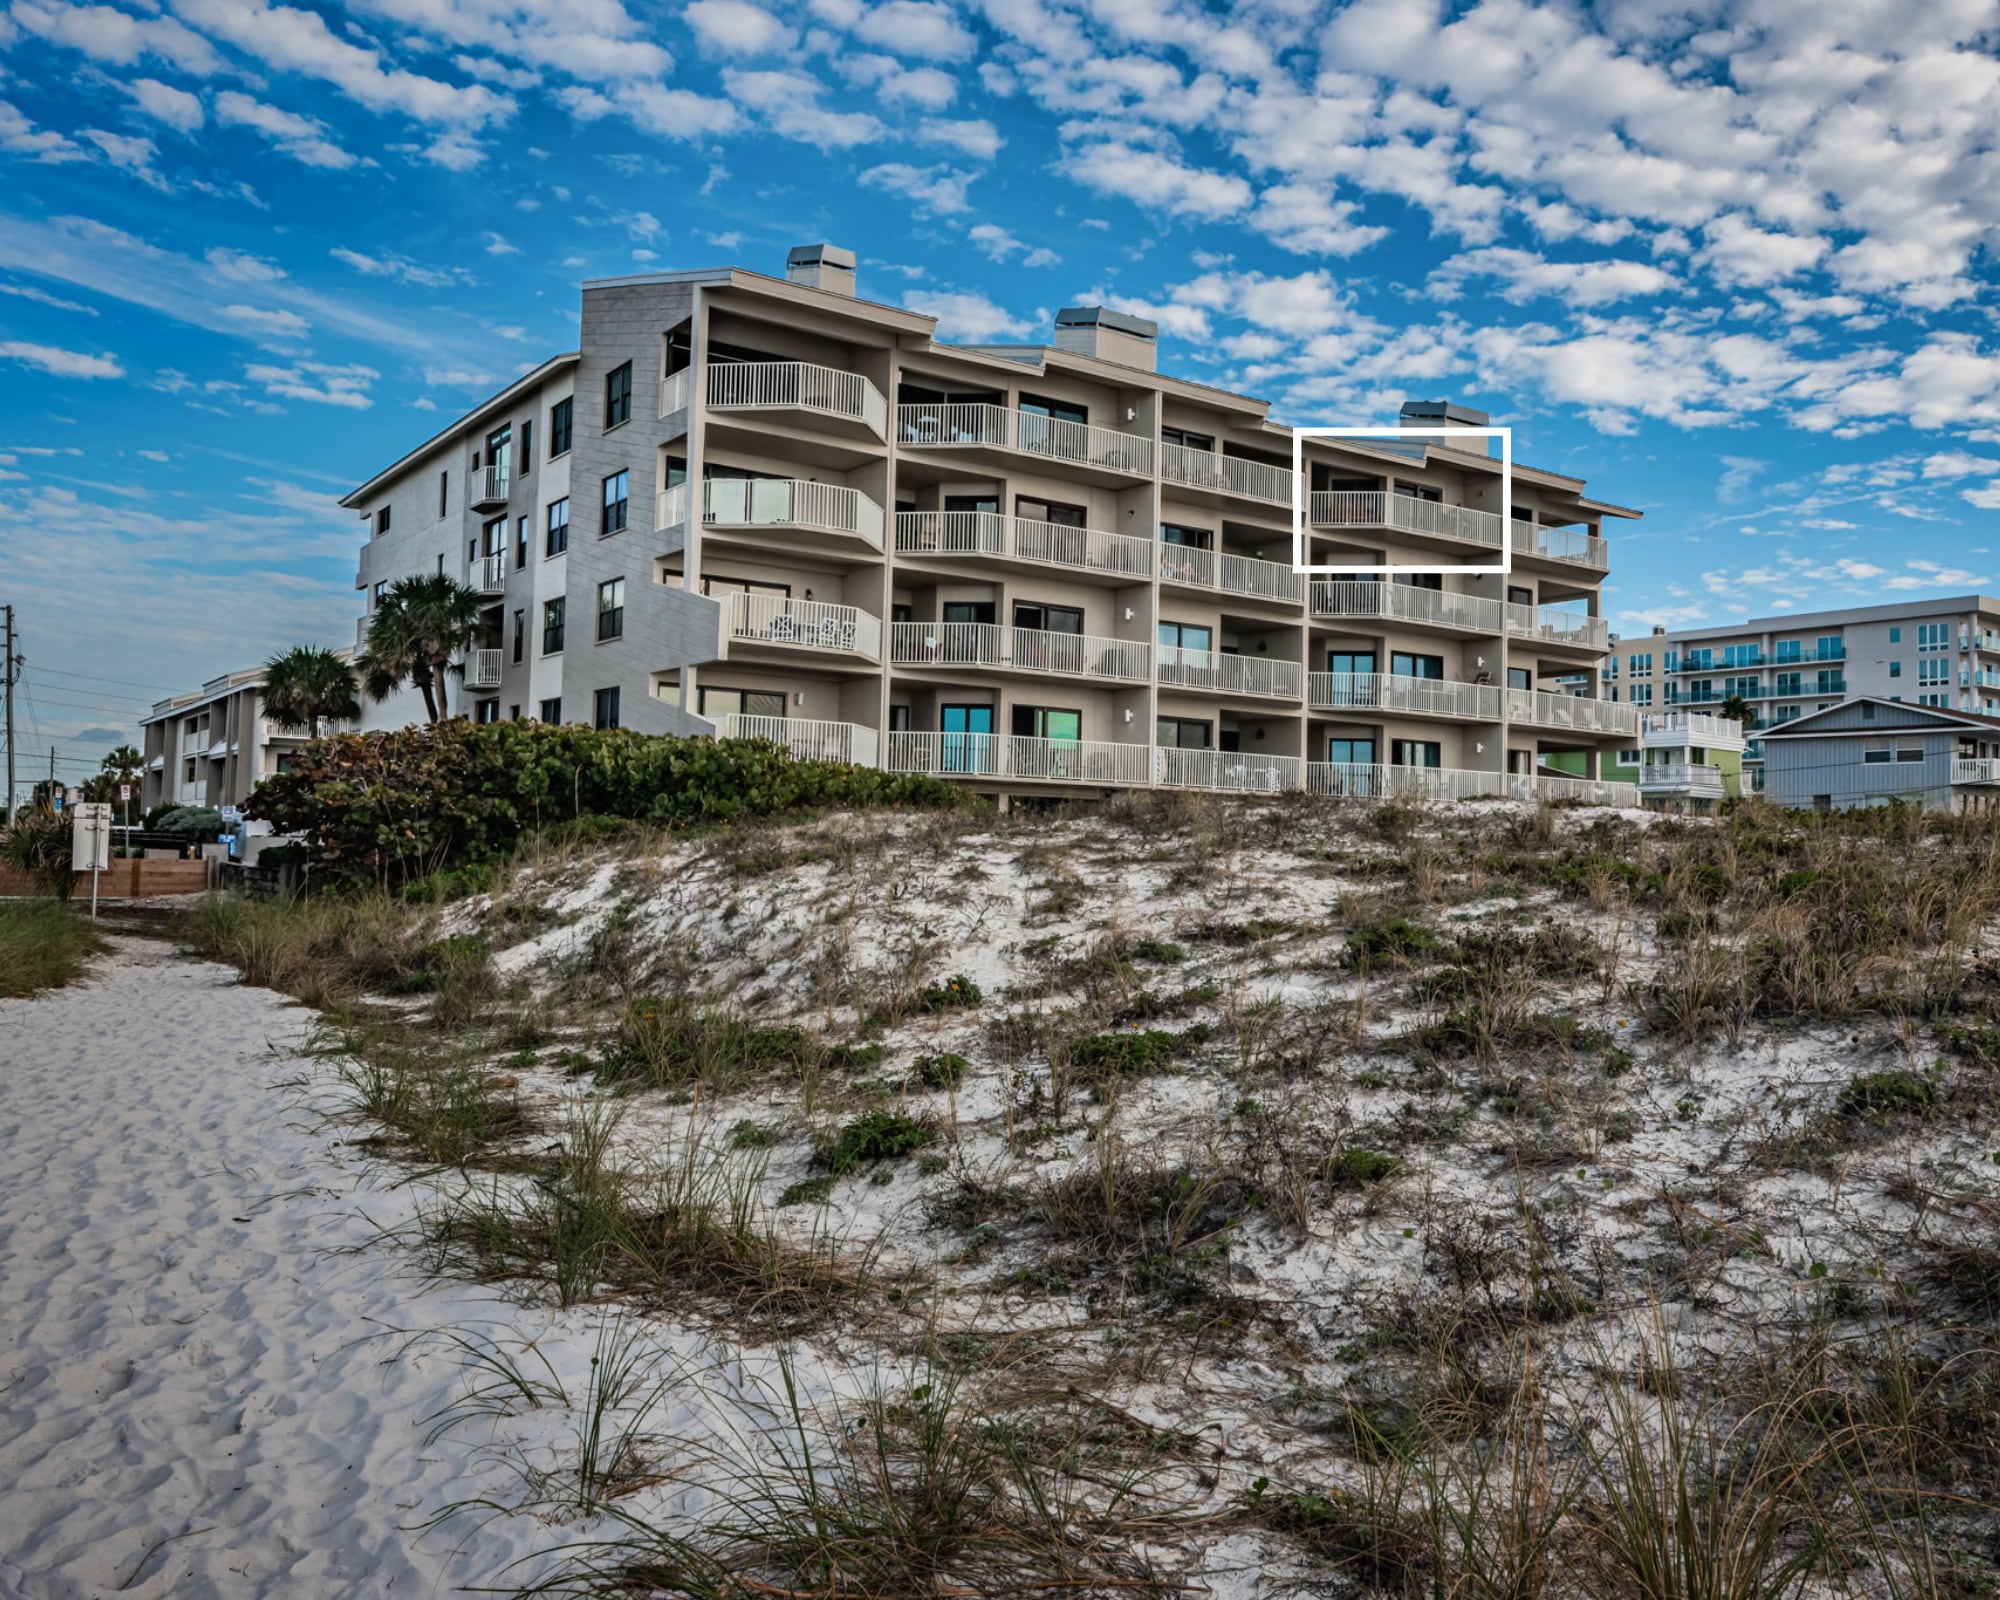 Property Image 2 - Villas of Clearwater Beach - Unit A17